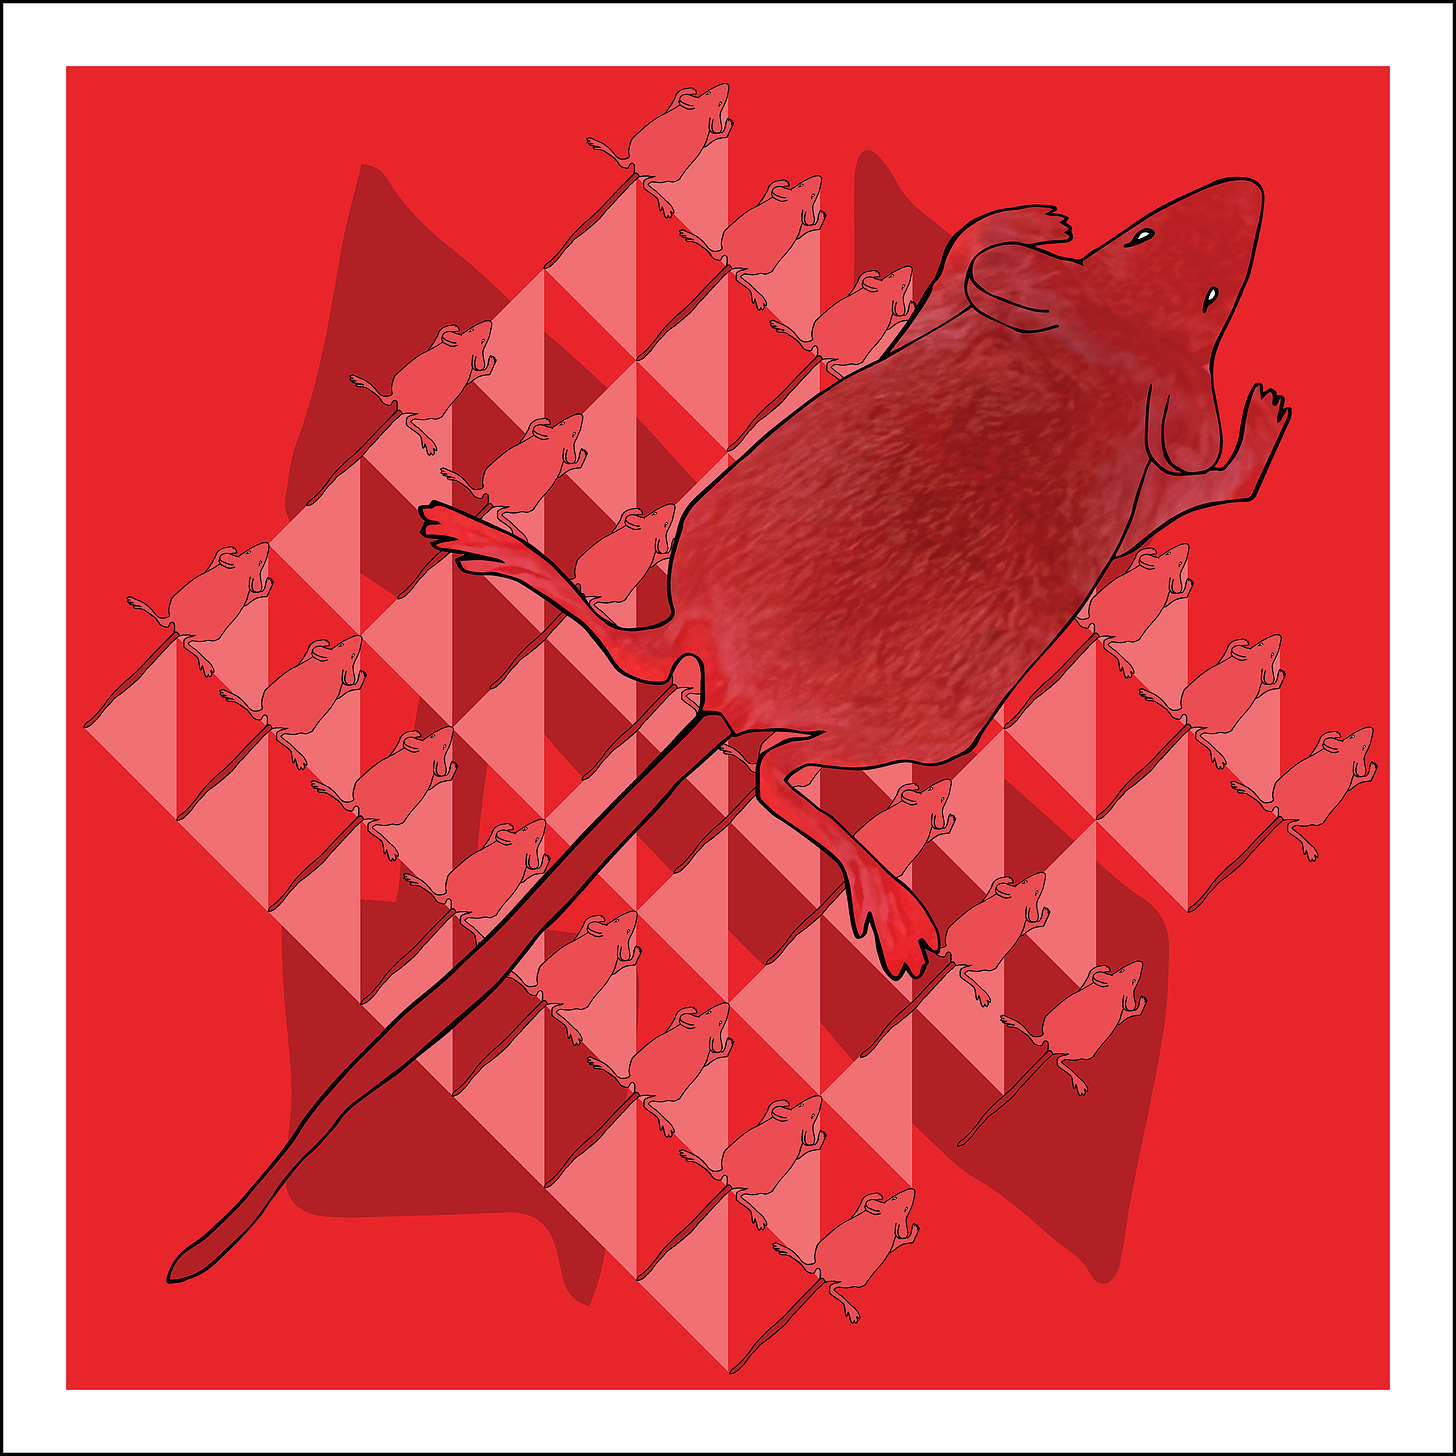 [01. Red Red Rainbow Squared card Year 7. An illustration of a giant mouse with tail pointed from left bottom and head pointed to right top and a photo of fur visible through it, and twenty four smaller mice of the same outline line three rows of a checkerboard with 49 squares that are each divided in half diagonally with one pink triangle exposed. There is a giant Hebrew letter aleph underneath the checkerboard.]